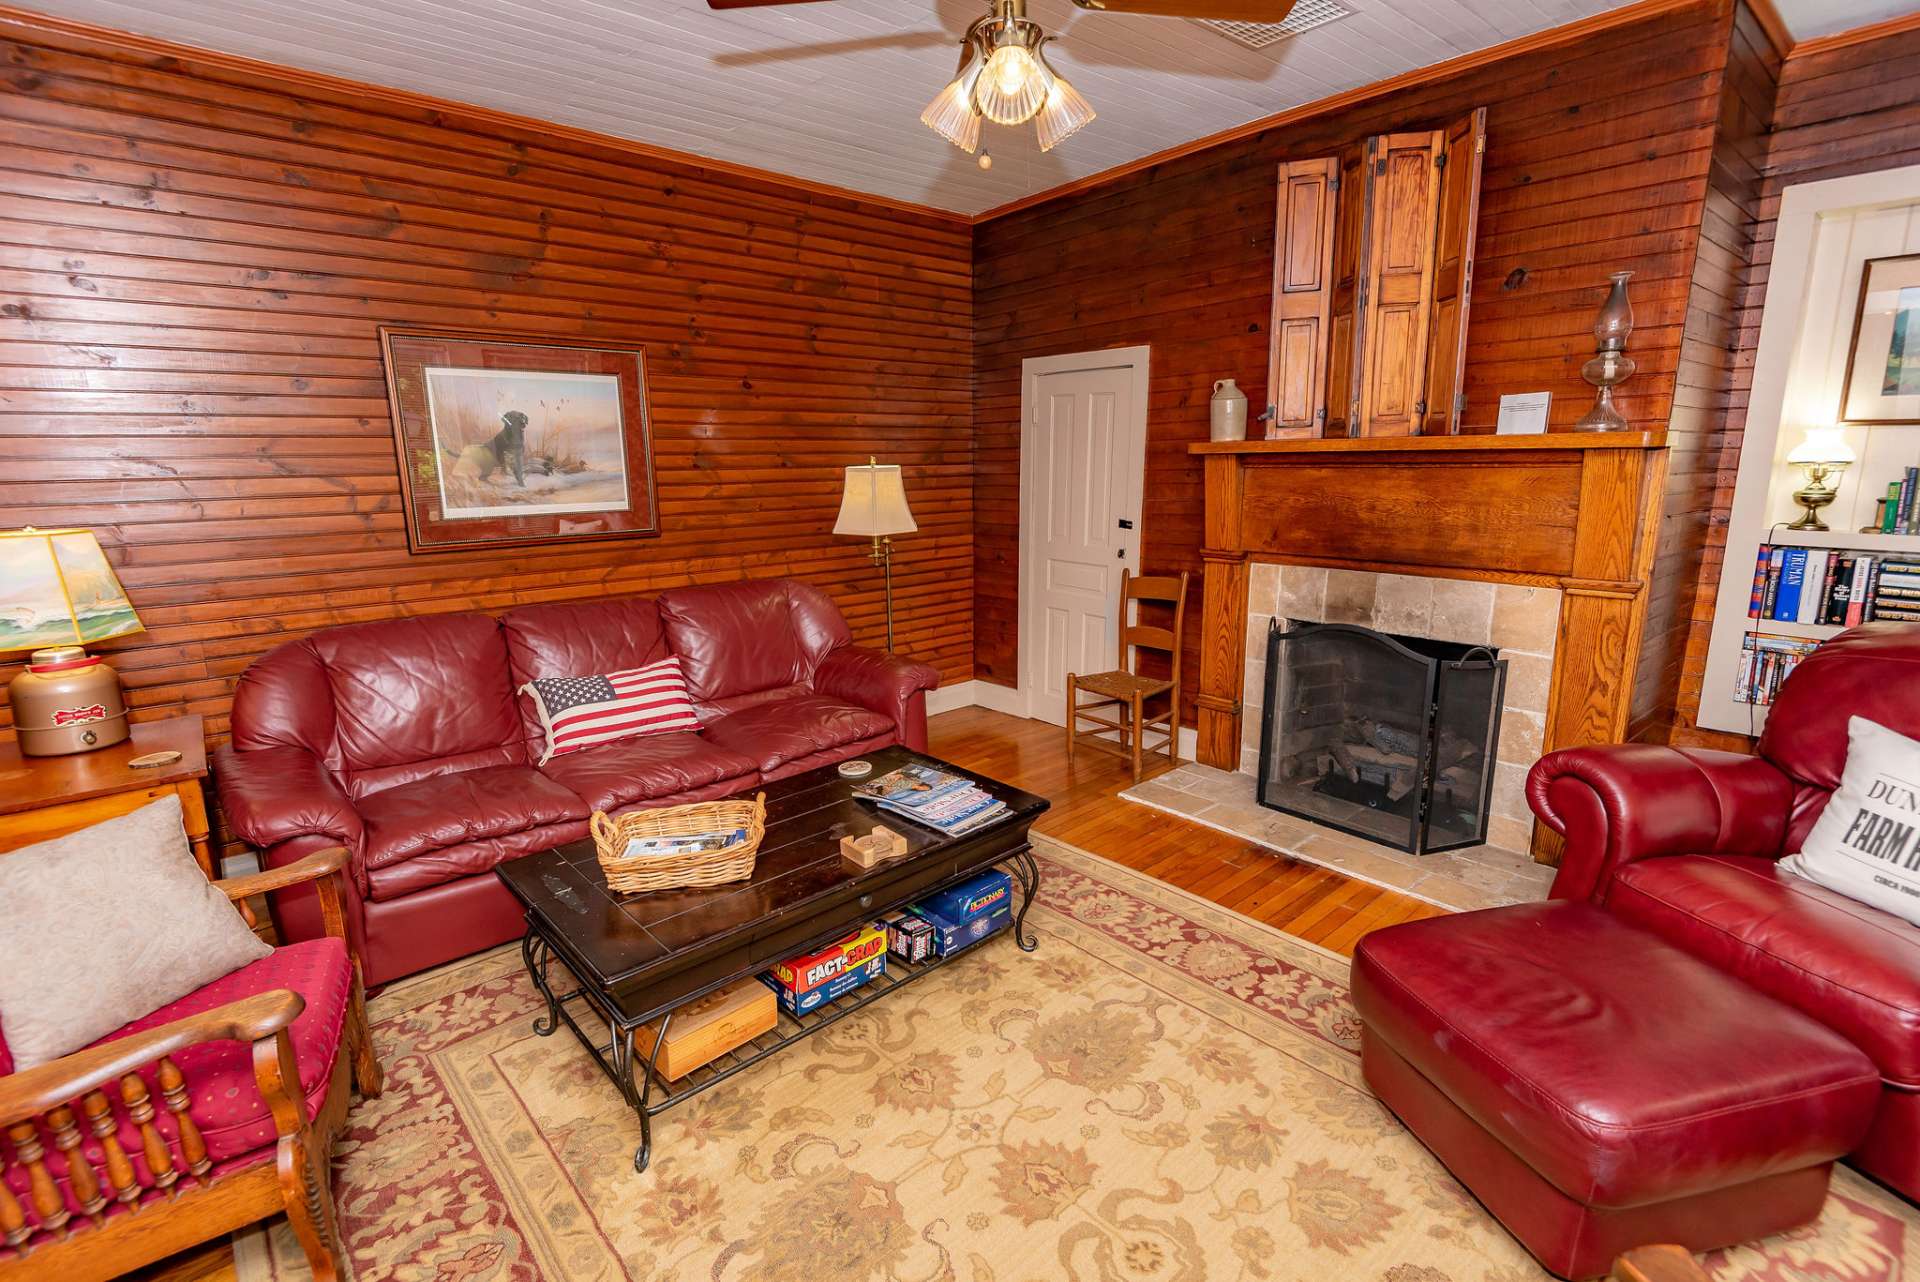 Relax in the cozy living room with original wood floors, beadboard walls, and fireplace with gas logs.